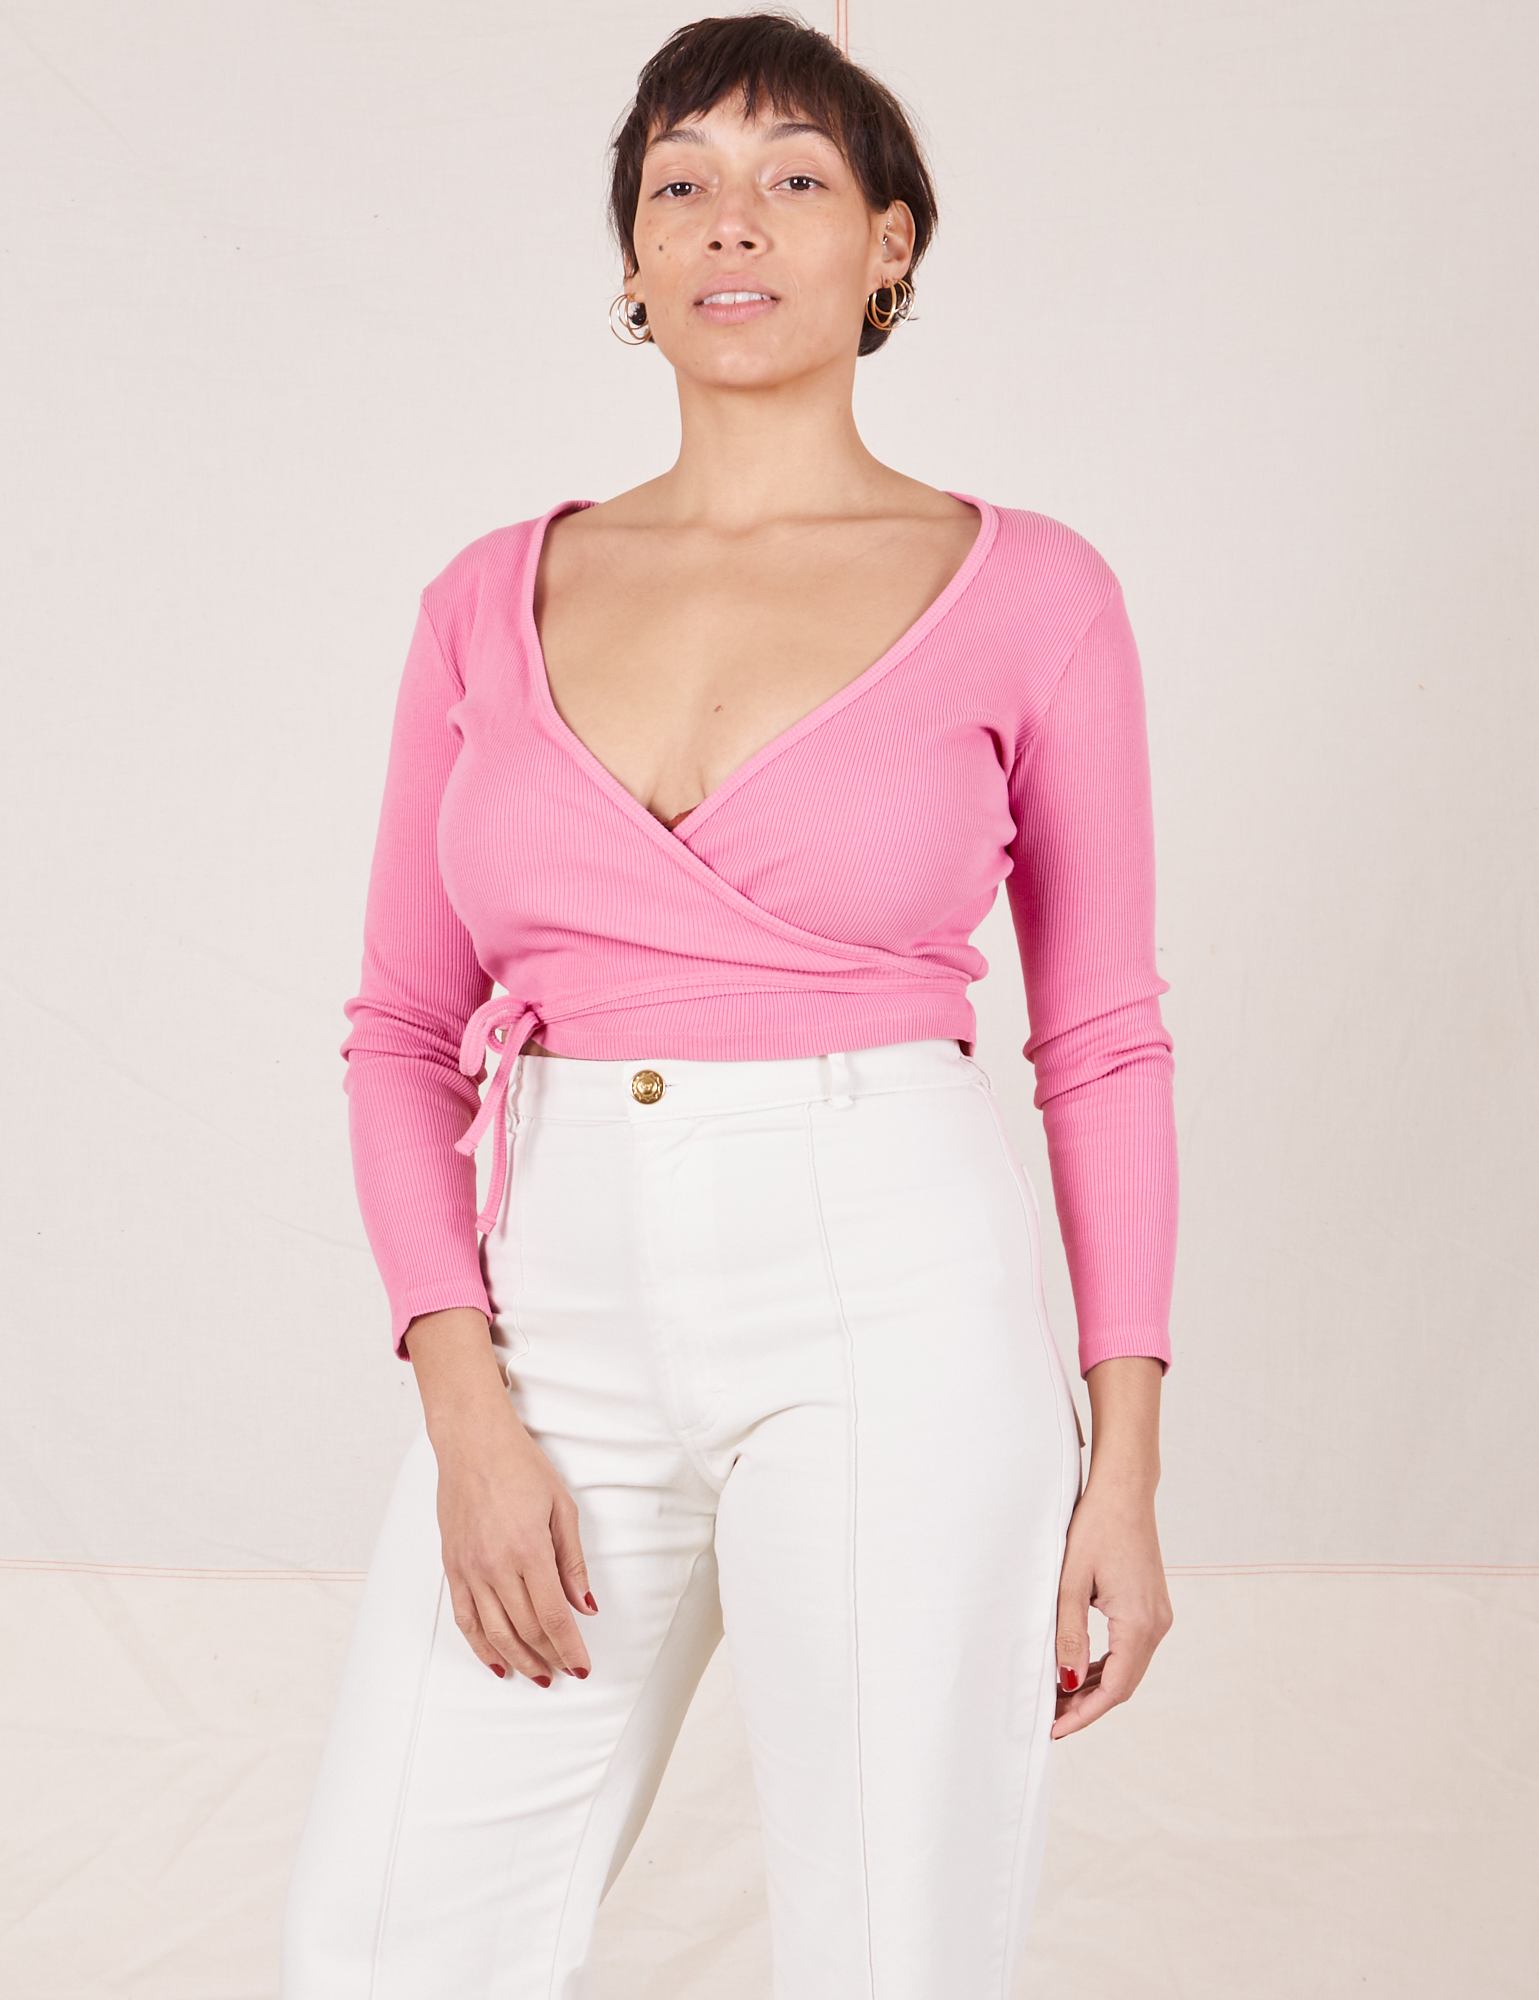 Tiara is wearing size 2 Wrap Top in Bubblegum Pink paired with vintage tee off-white Western Pants